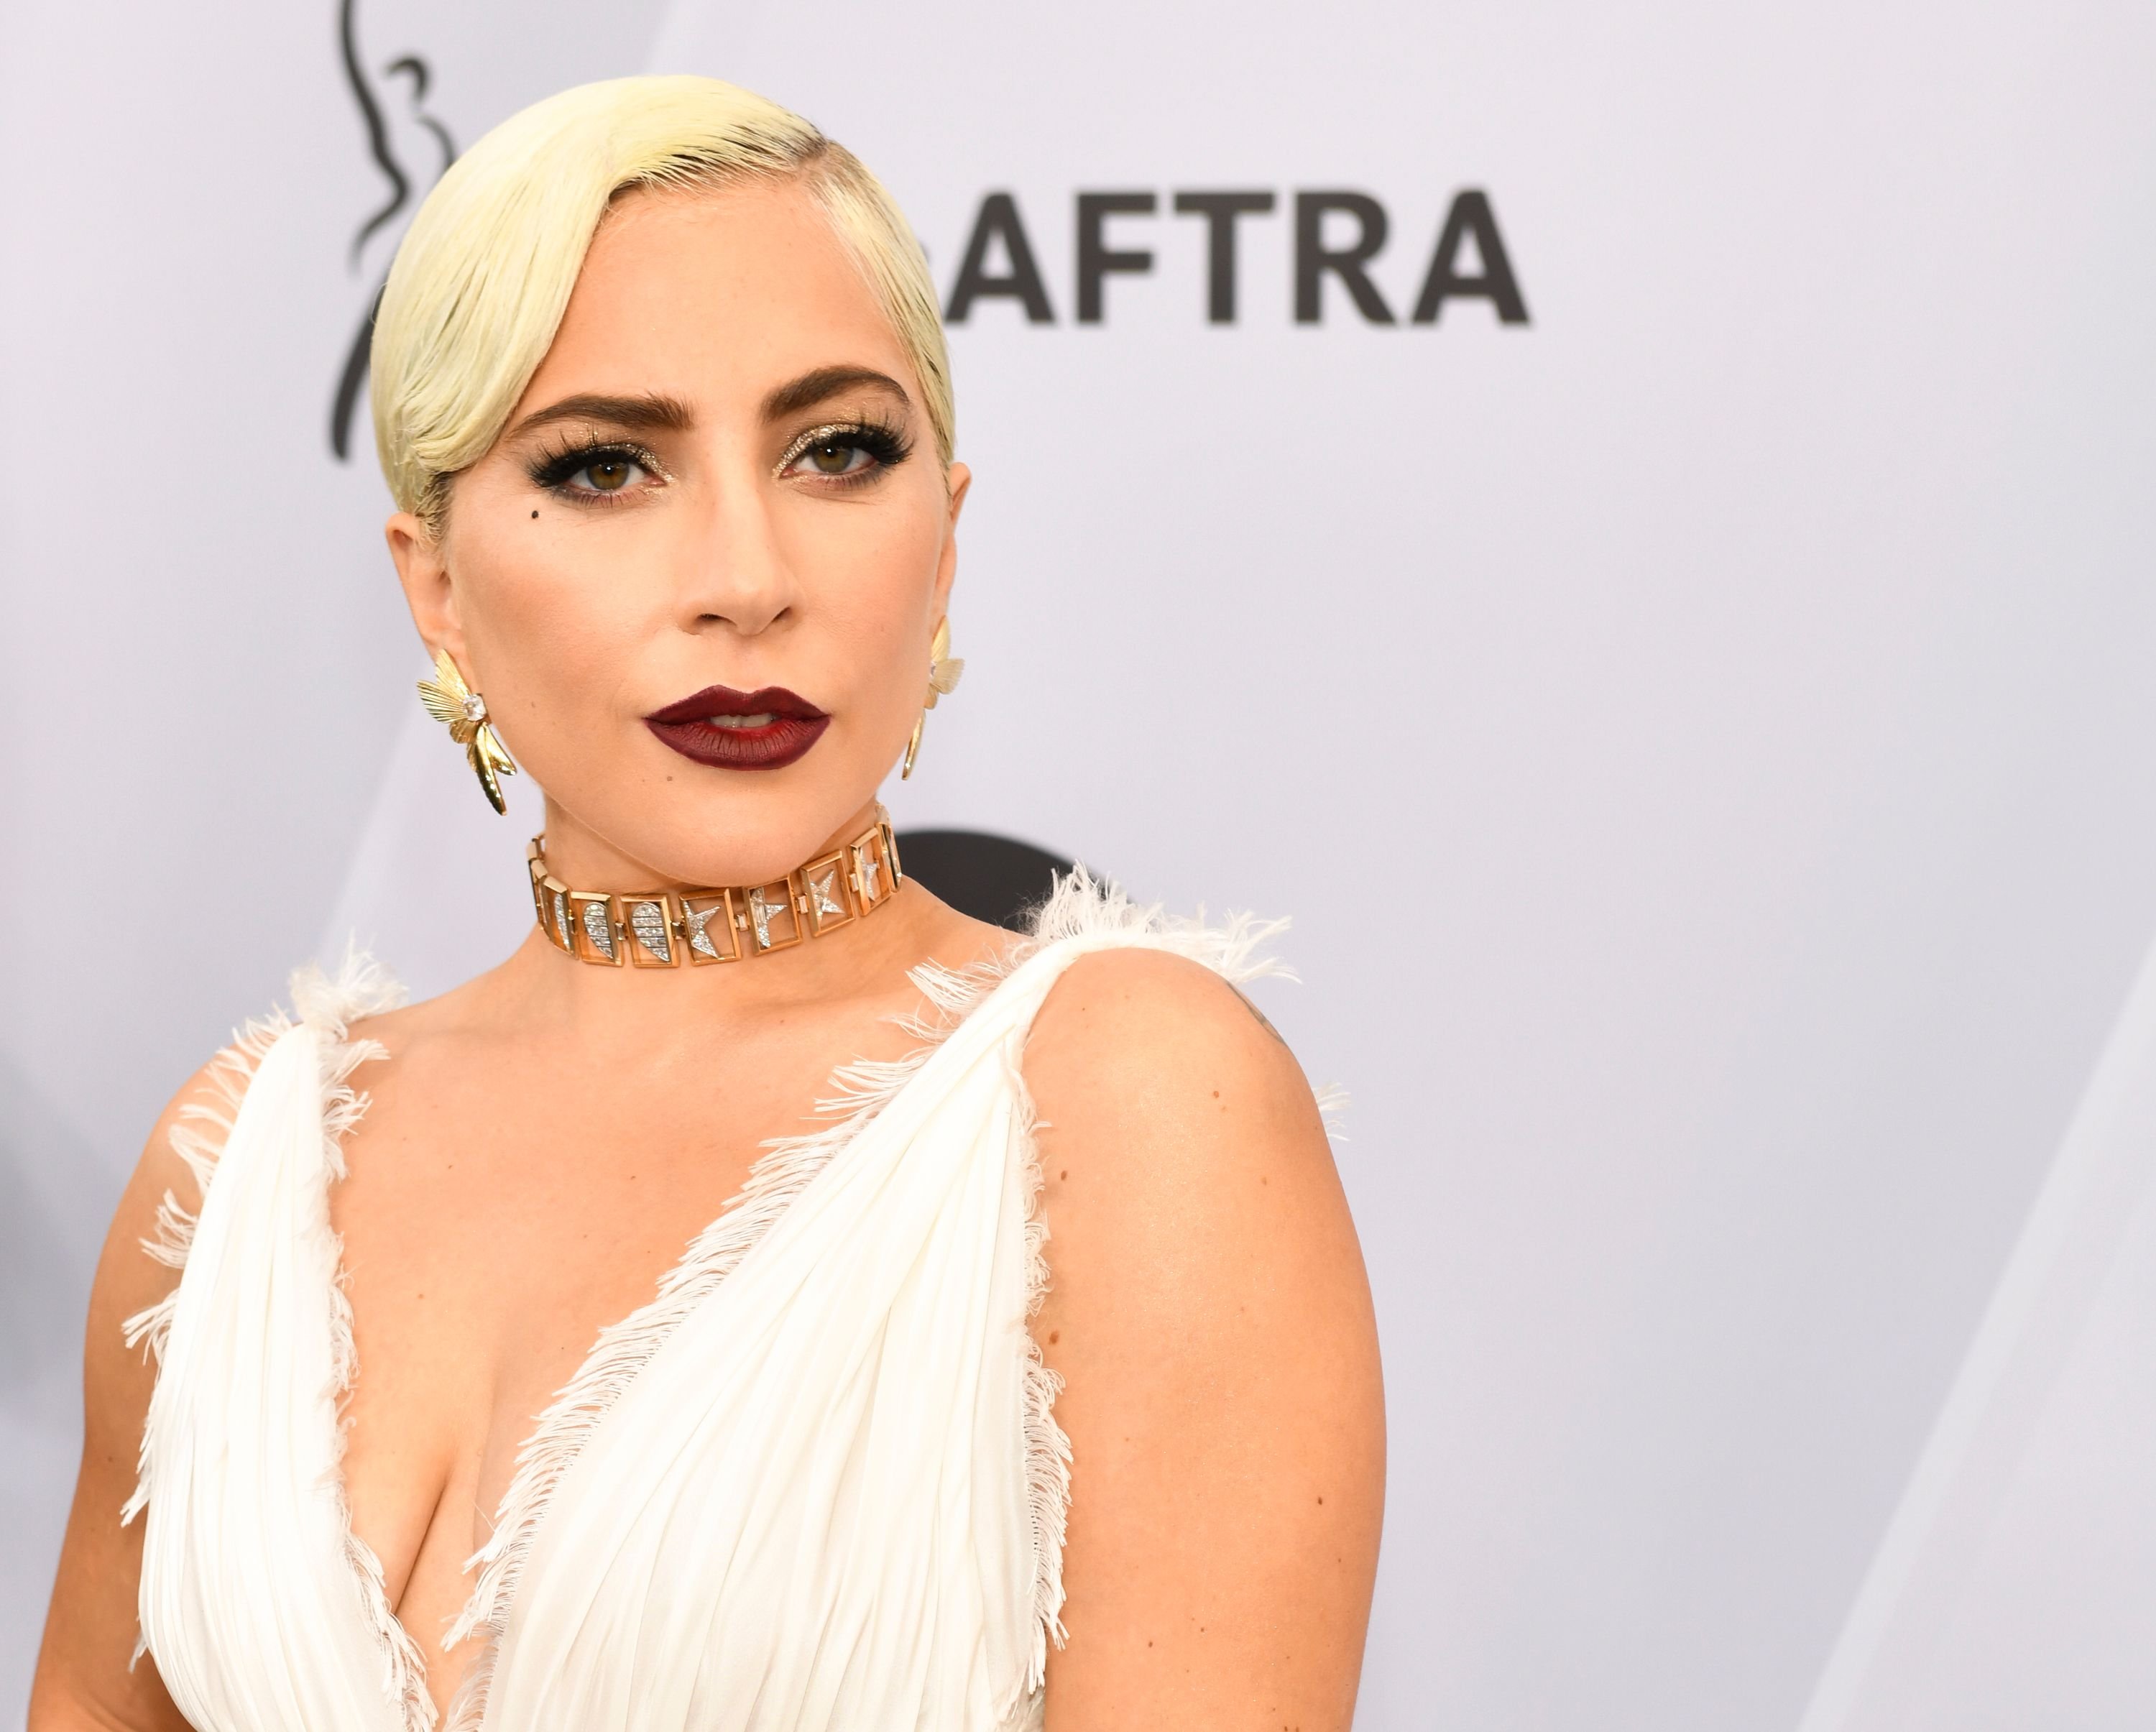 Lady Gaga at the 25th Annual Screen Actors Guild Awards at The Shrine Auditorium on January 27, 2019 | Photo: Getty Images